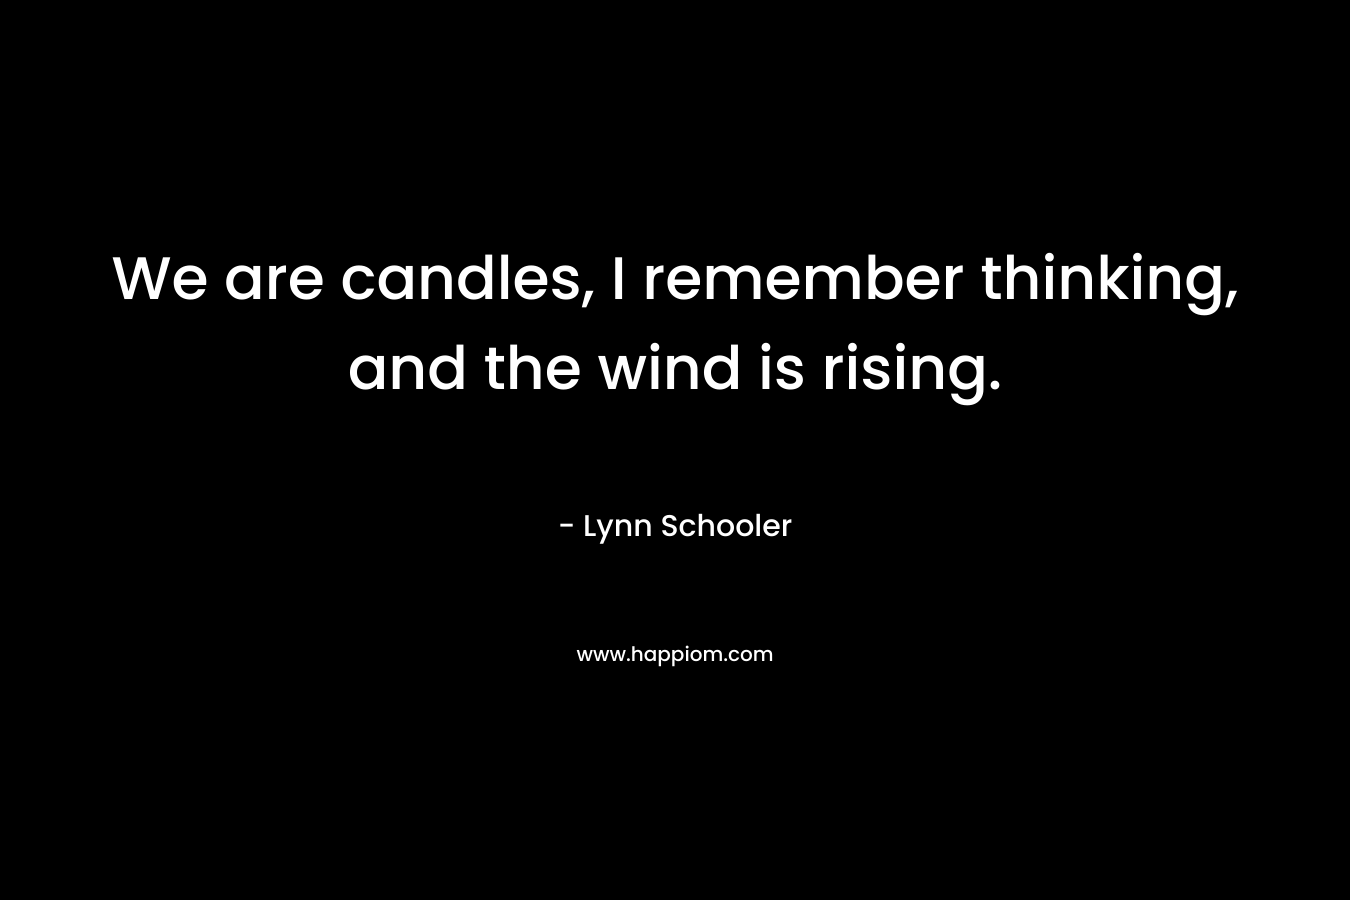 We are candles, I remember thinking, and the wind is rising. – Lynn Schooler